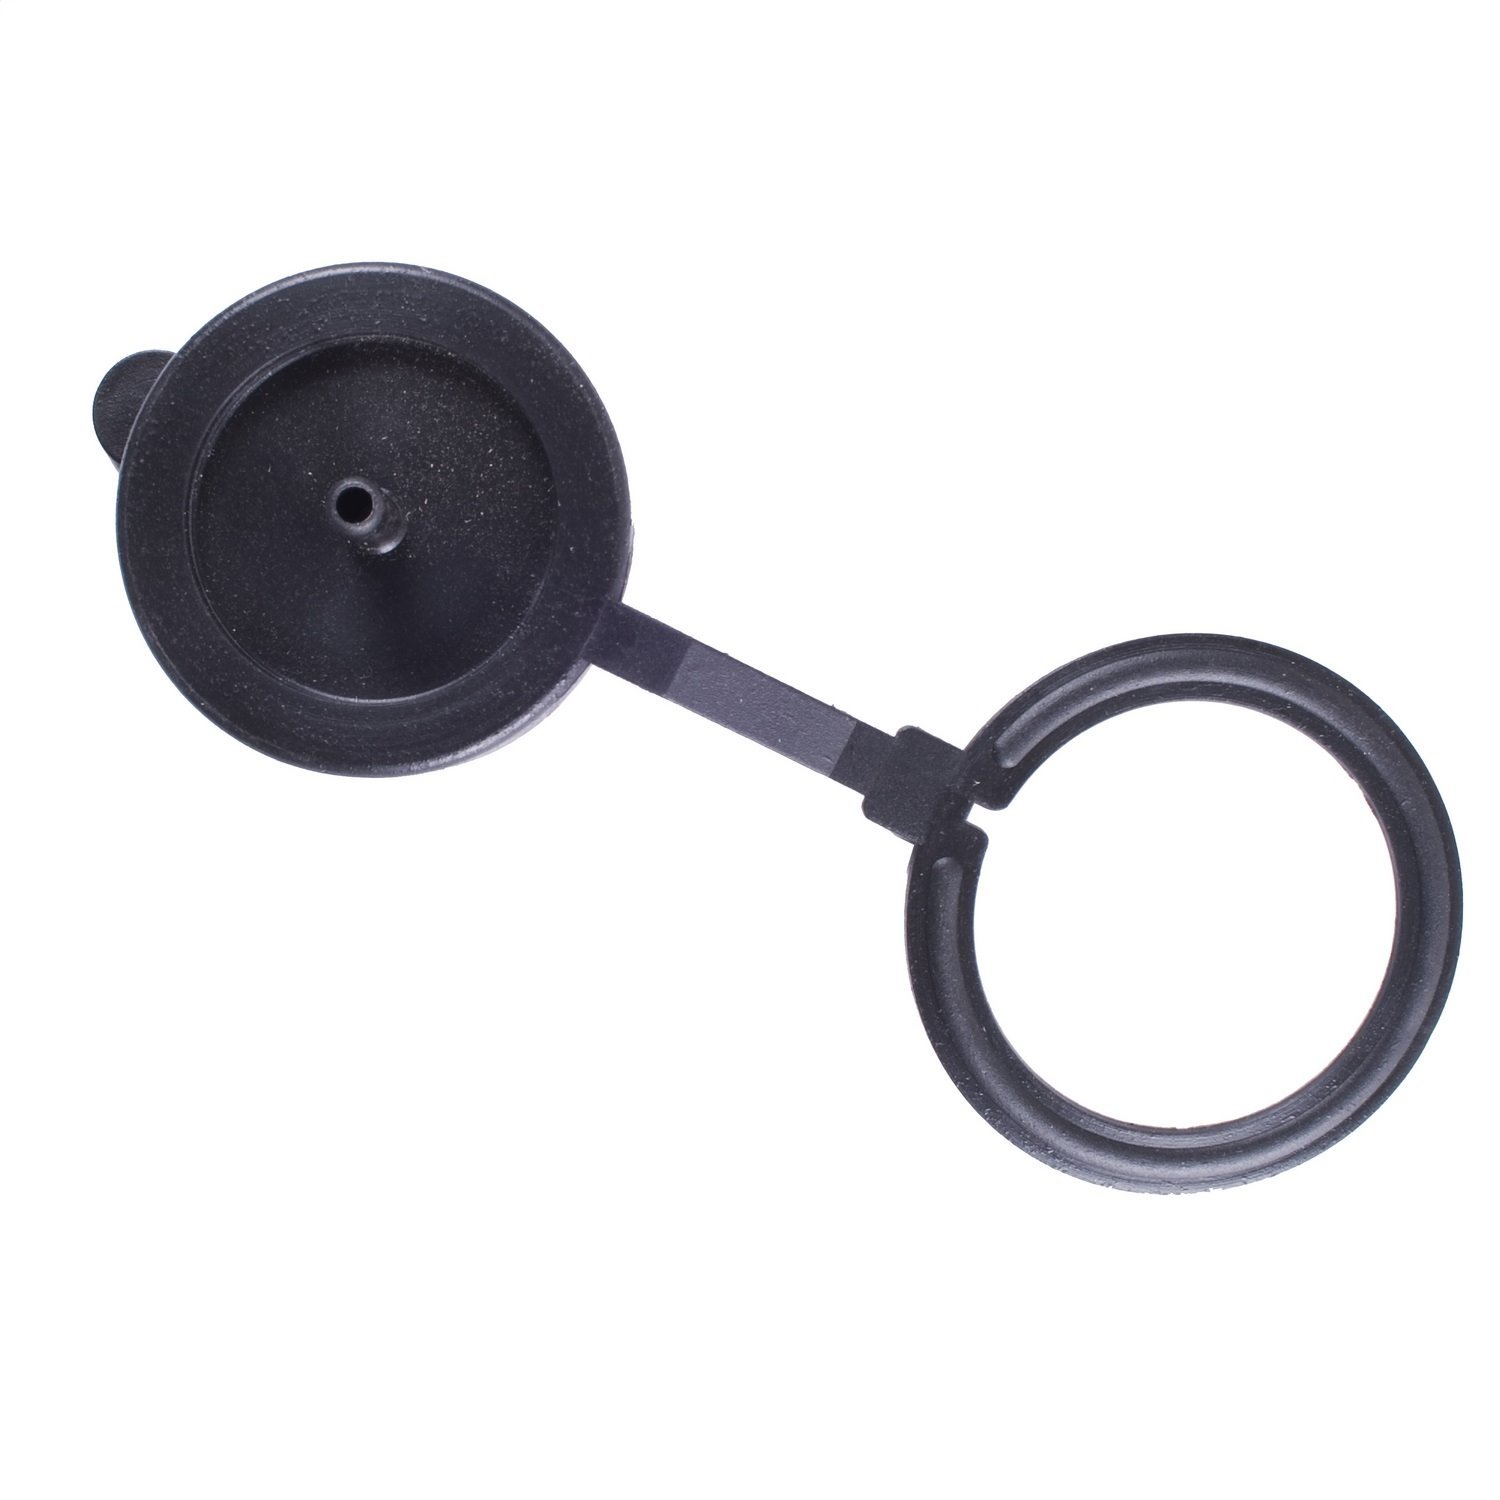 Replacement windshield washer reservoir cap from Omix-ADA, Fits